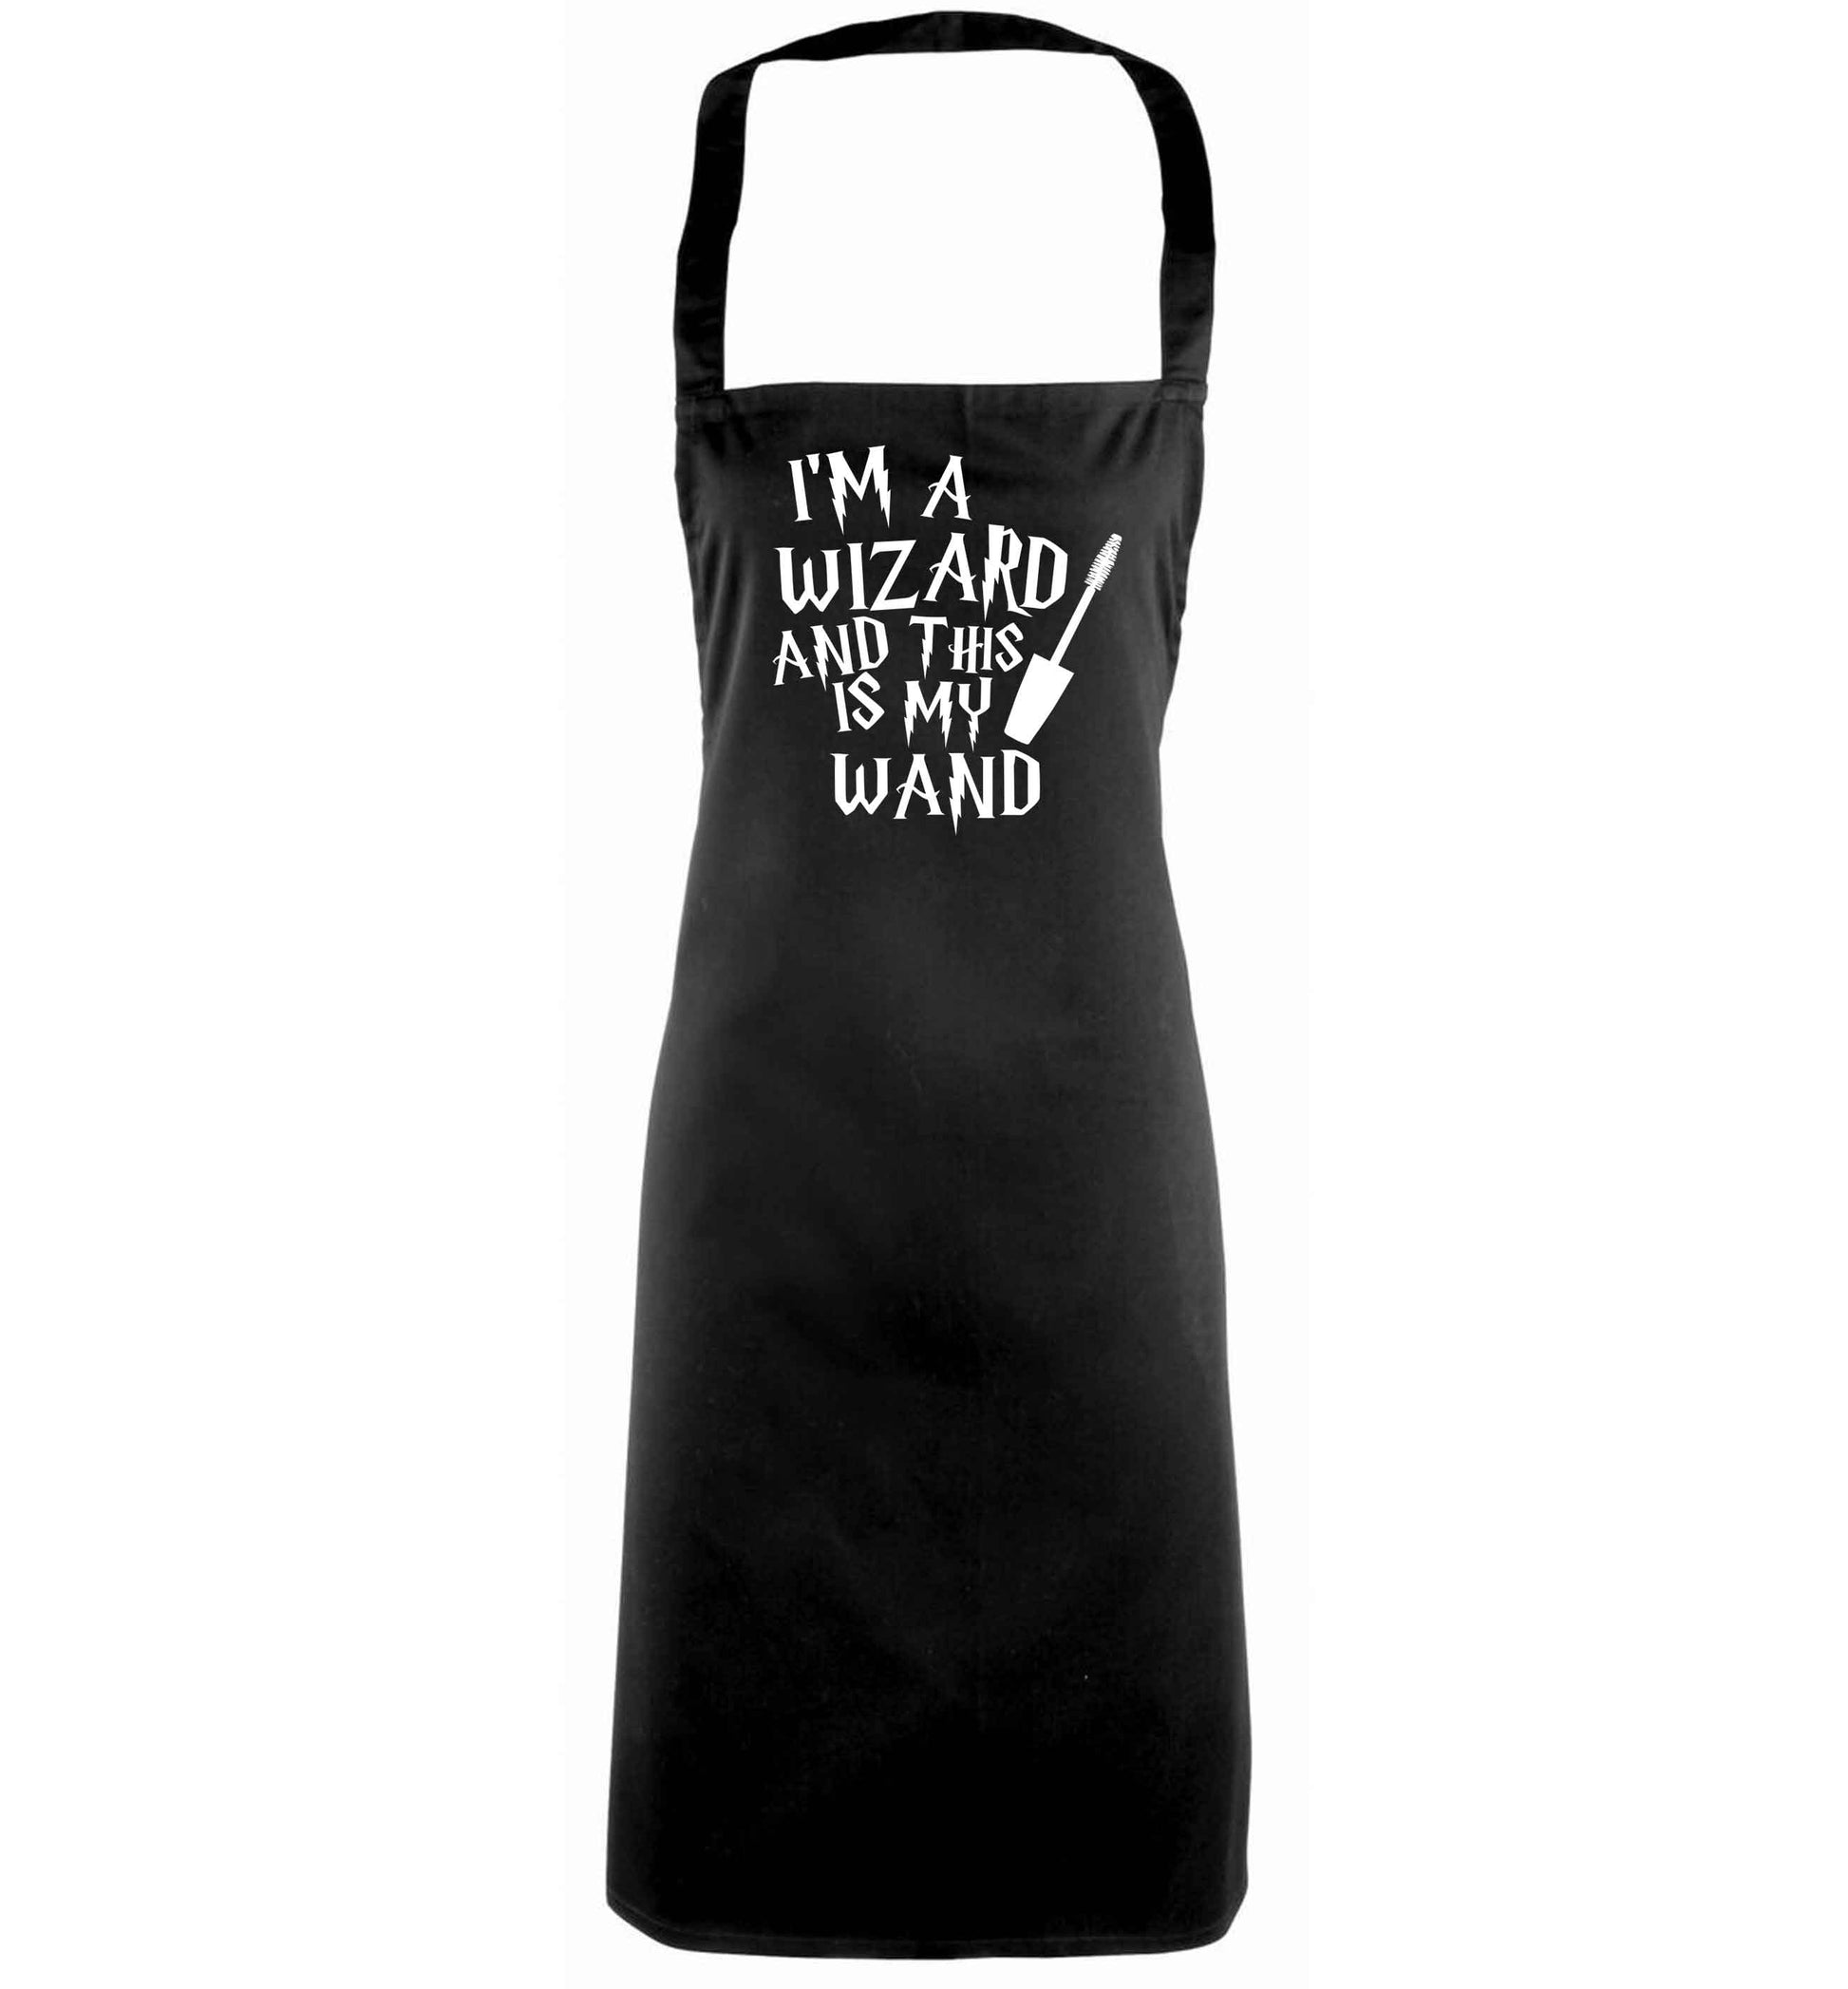 I'm a wizard and this is my wand black apron